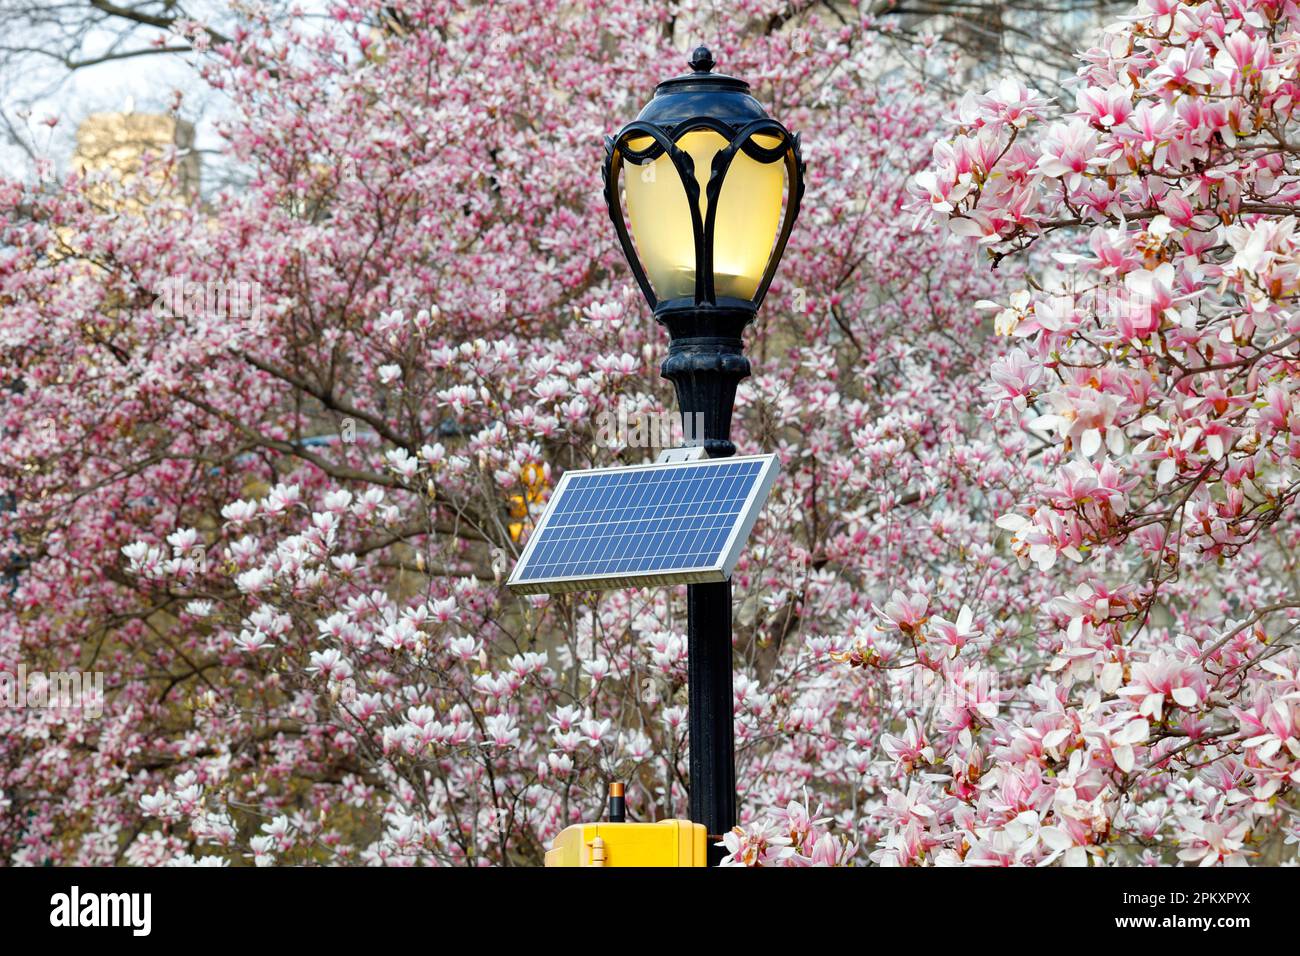 A solar panel powering a wireless emergency telephone mounted on a lamp post with magnolia trees in the background, in Central Park, New York City Stock Photo